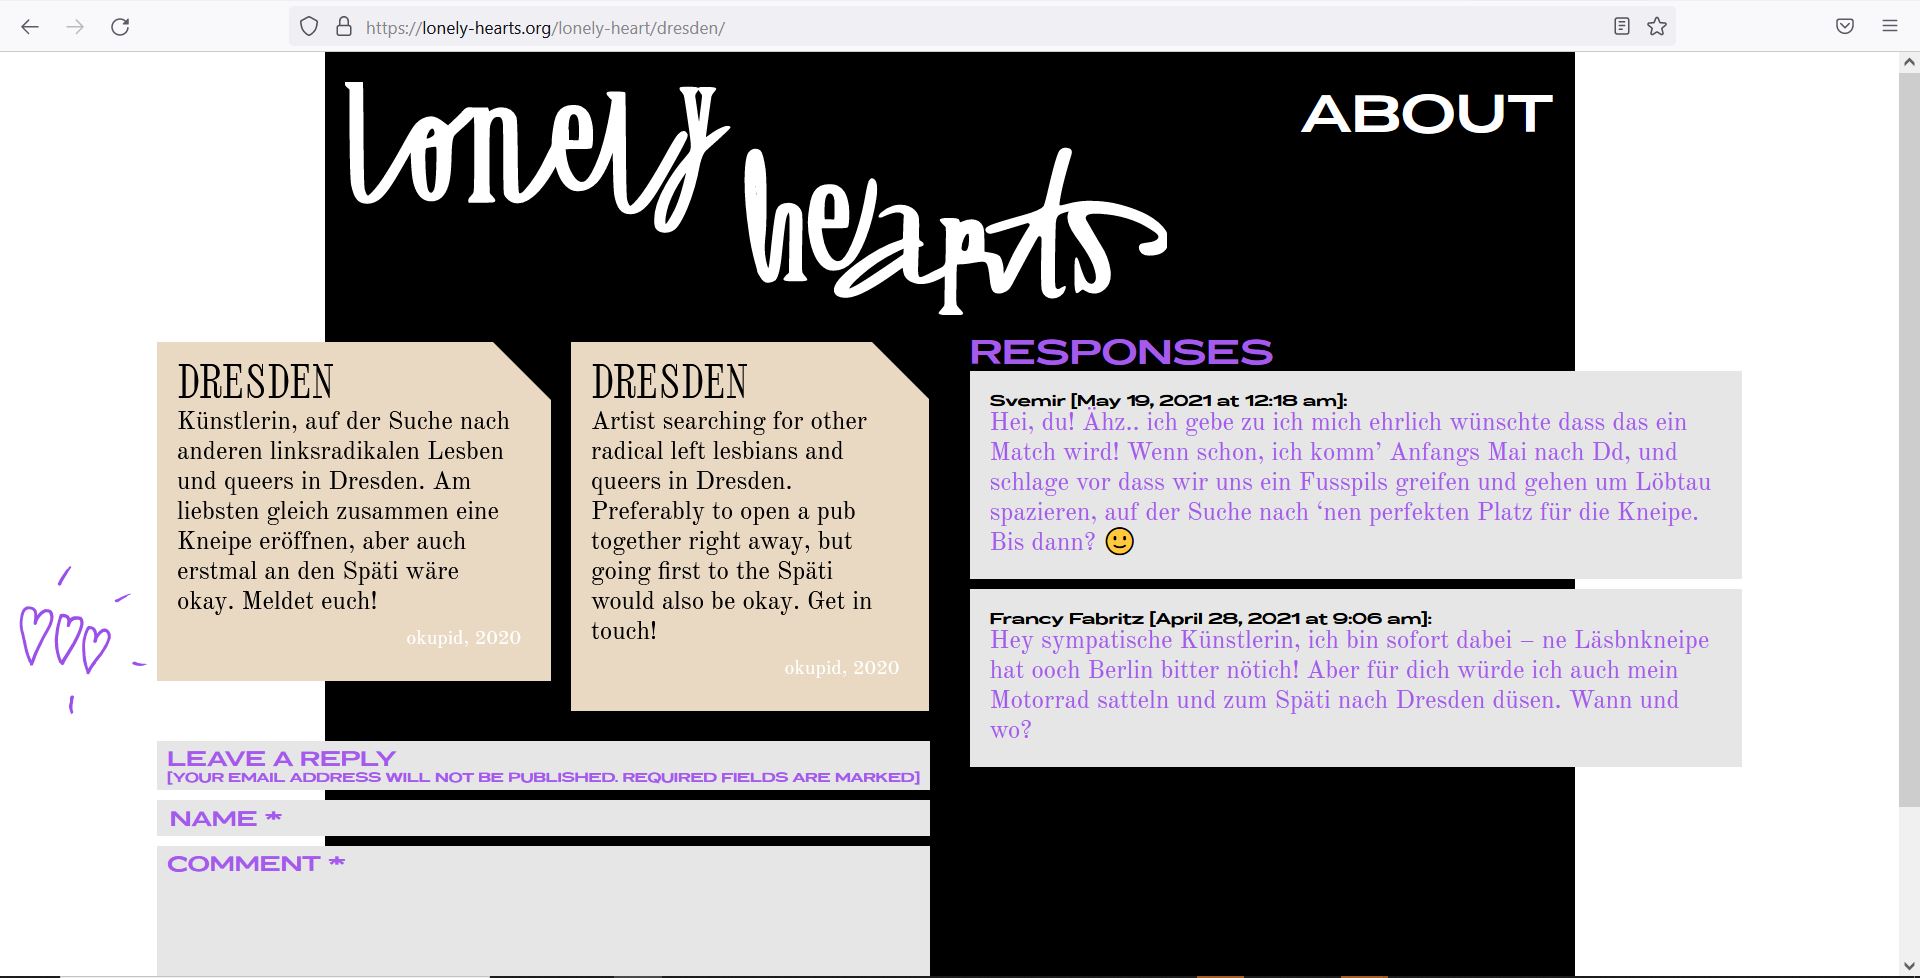 Landscape color screenshot lonely-hearts.org. The opened browser window has a black background with "lonely hearts" written in white curved font at the top, and "About" written in sans-serif font in the rehct upper corner. In the center, two beige rectangles with a cut corner are arranged next to each other. On the left one is written in black letters "Dresden artist, looking for other radical left lesbians and queers in Dresden. Preferably open a pub together, but also first to the Späti would be okay. Get in touch! Okupid, 2020", on the right the same text in English. Next to it is a purple hand drawing of three small hearts, below them three gray boxes with the words "leave a reply", "name" and "comment". On the right are two gray boxes above which is written "Responses". The top one shows the following text: Svemir [May 19, 2021 at 12:18 am]: Hey you! Ehz... I admit I honestly wish this would be a match! If so, I'll come to Dd in early May, and suggest we grab a Fusspils and go for a walk around Löbtau, looking for 'nen perfect place for the pub. See you then? ? The box below shows this text: Francy Fabritz [April 28, 2021 at 9:06 am]: Hey sympathetic artist, I'm in immediately - ne Läsbnkneipe has ooch Berlin bitter nötich! But for you, I would also saddle up my motorcycle and jet off to the Späti in Dresden. When and where?